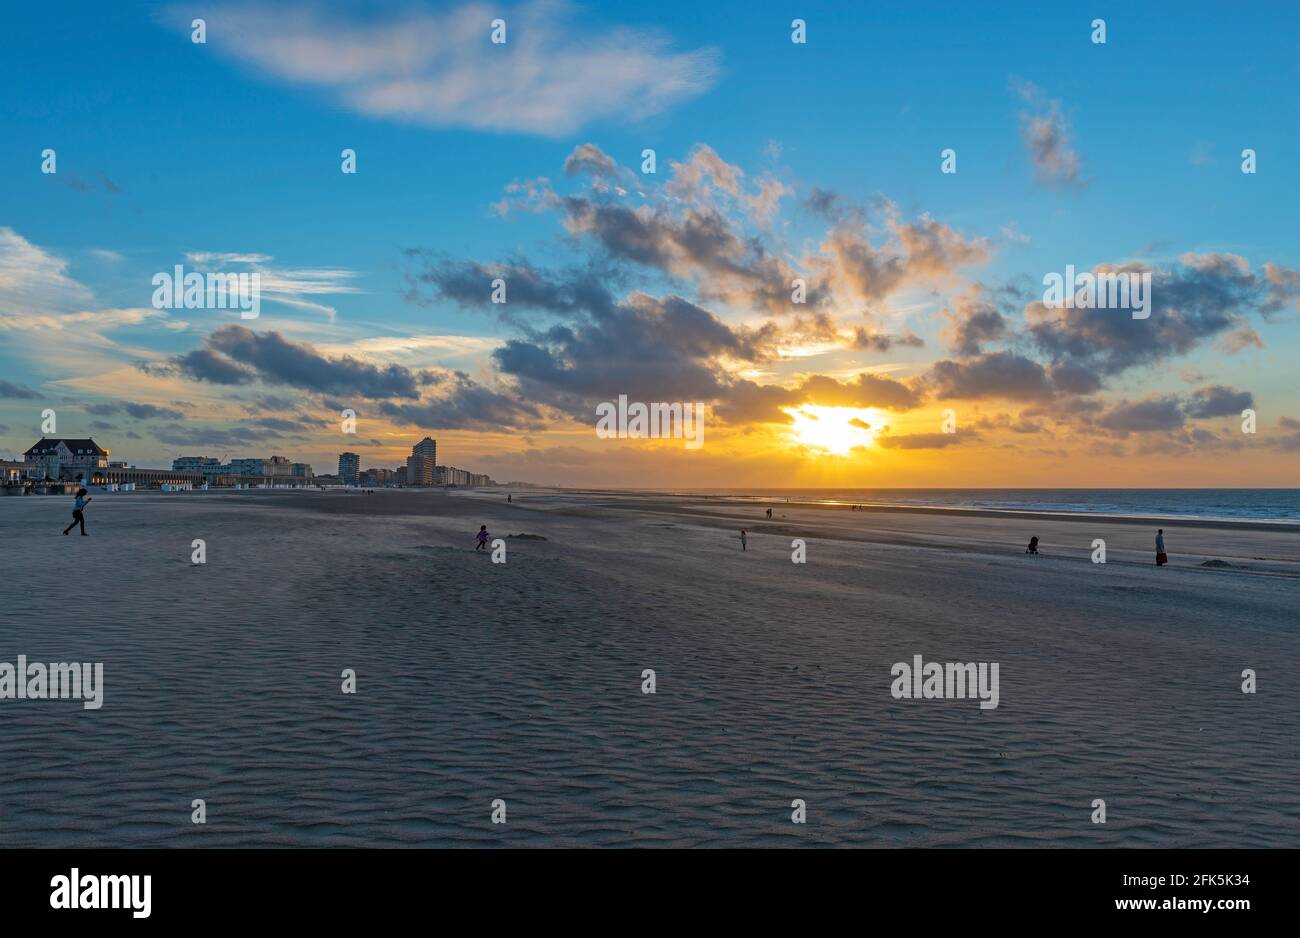 Silhouette of unrecognizable people walking on Oostende (Ostend) beach at sunset, Flanders, Belgium. Stock Photo